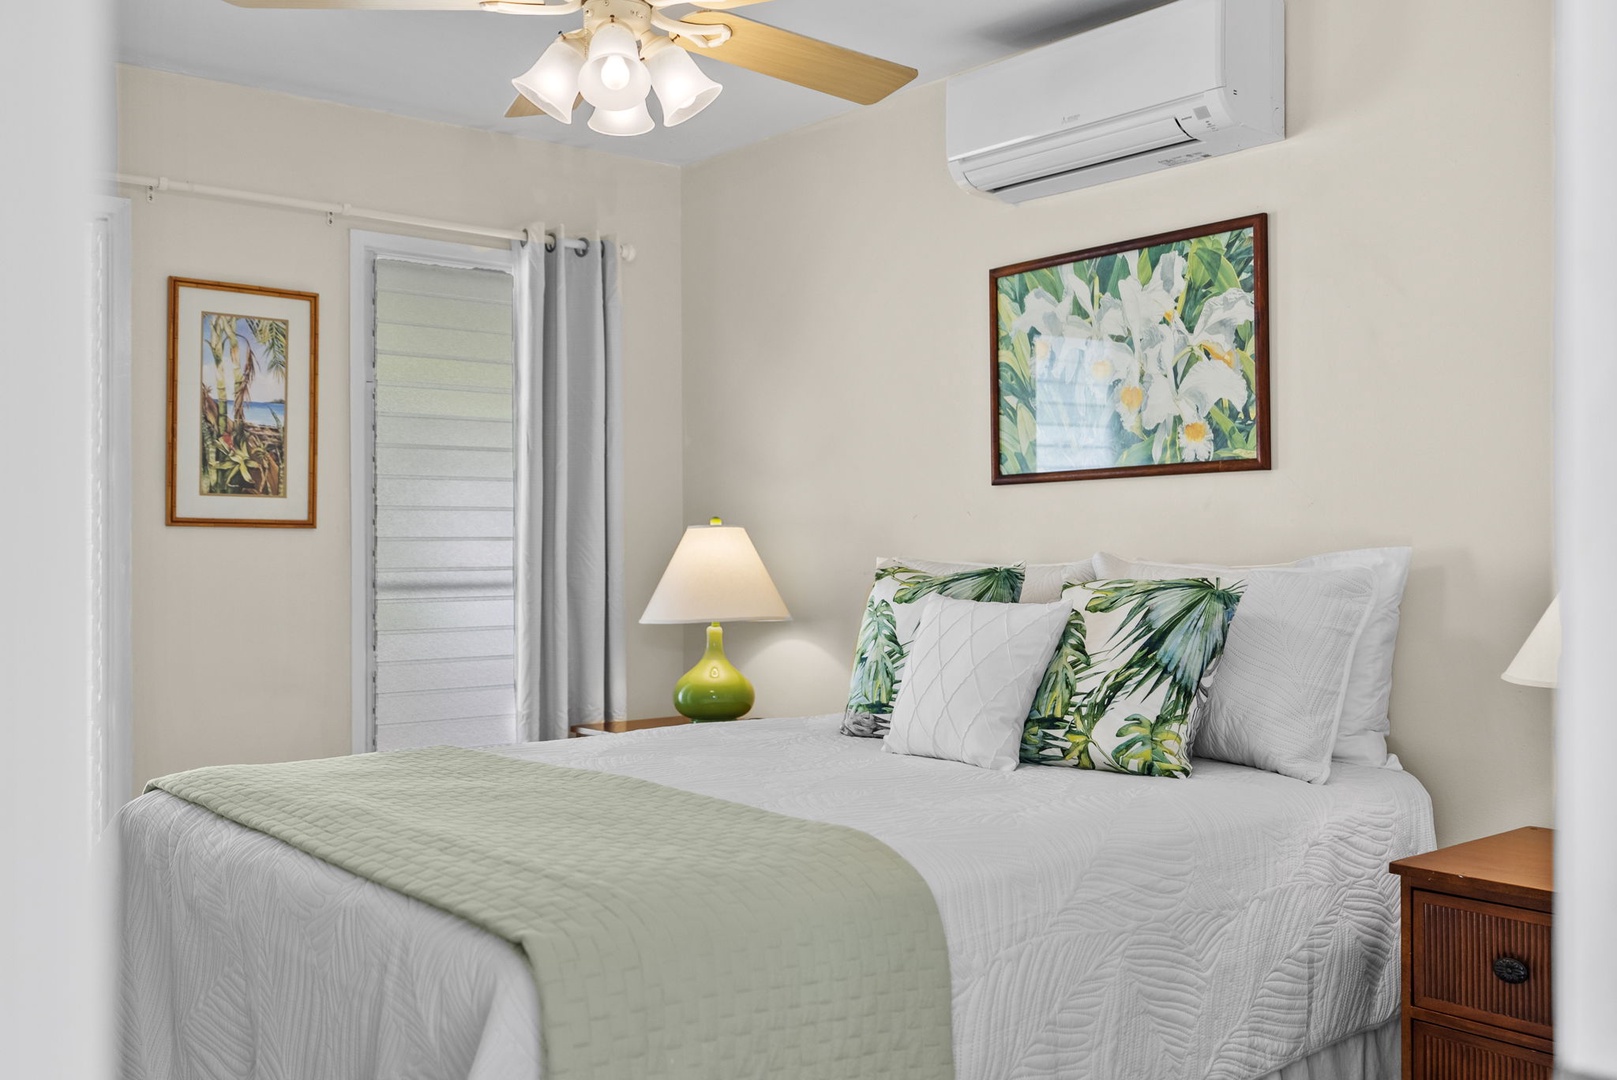 Kailua Vacation Rentals, Hale Aloha - Second guest suite exuding warmth and comfort, complete with a split type AC and top-quality linens for a peaceful slumber.